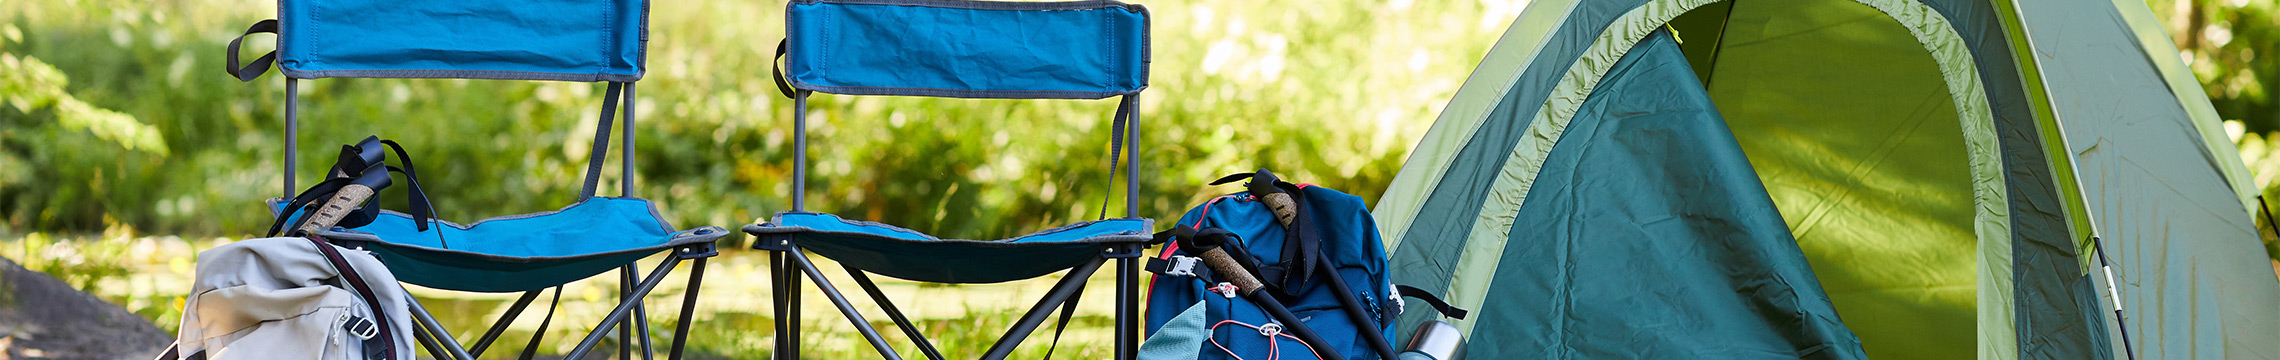 Camp chair with tent, bed roll, and backpack